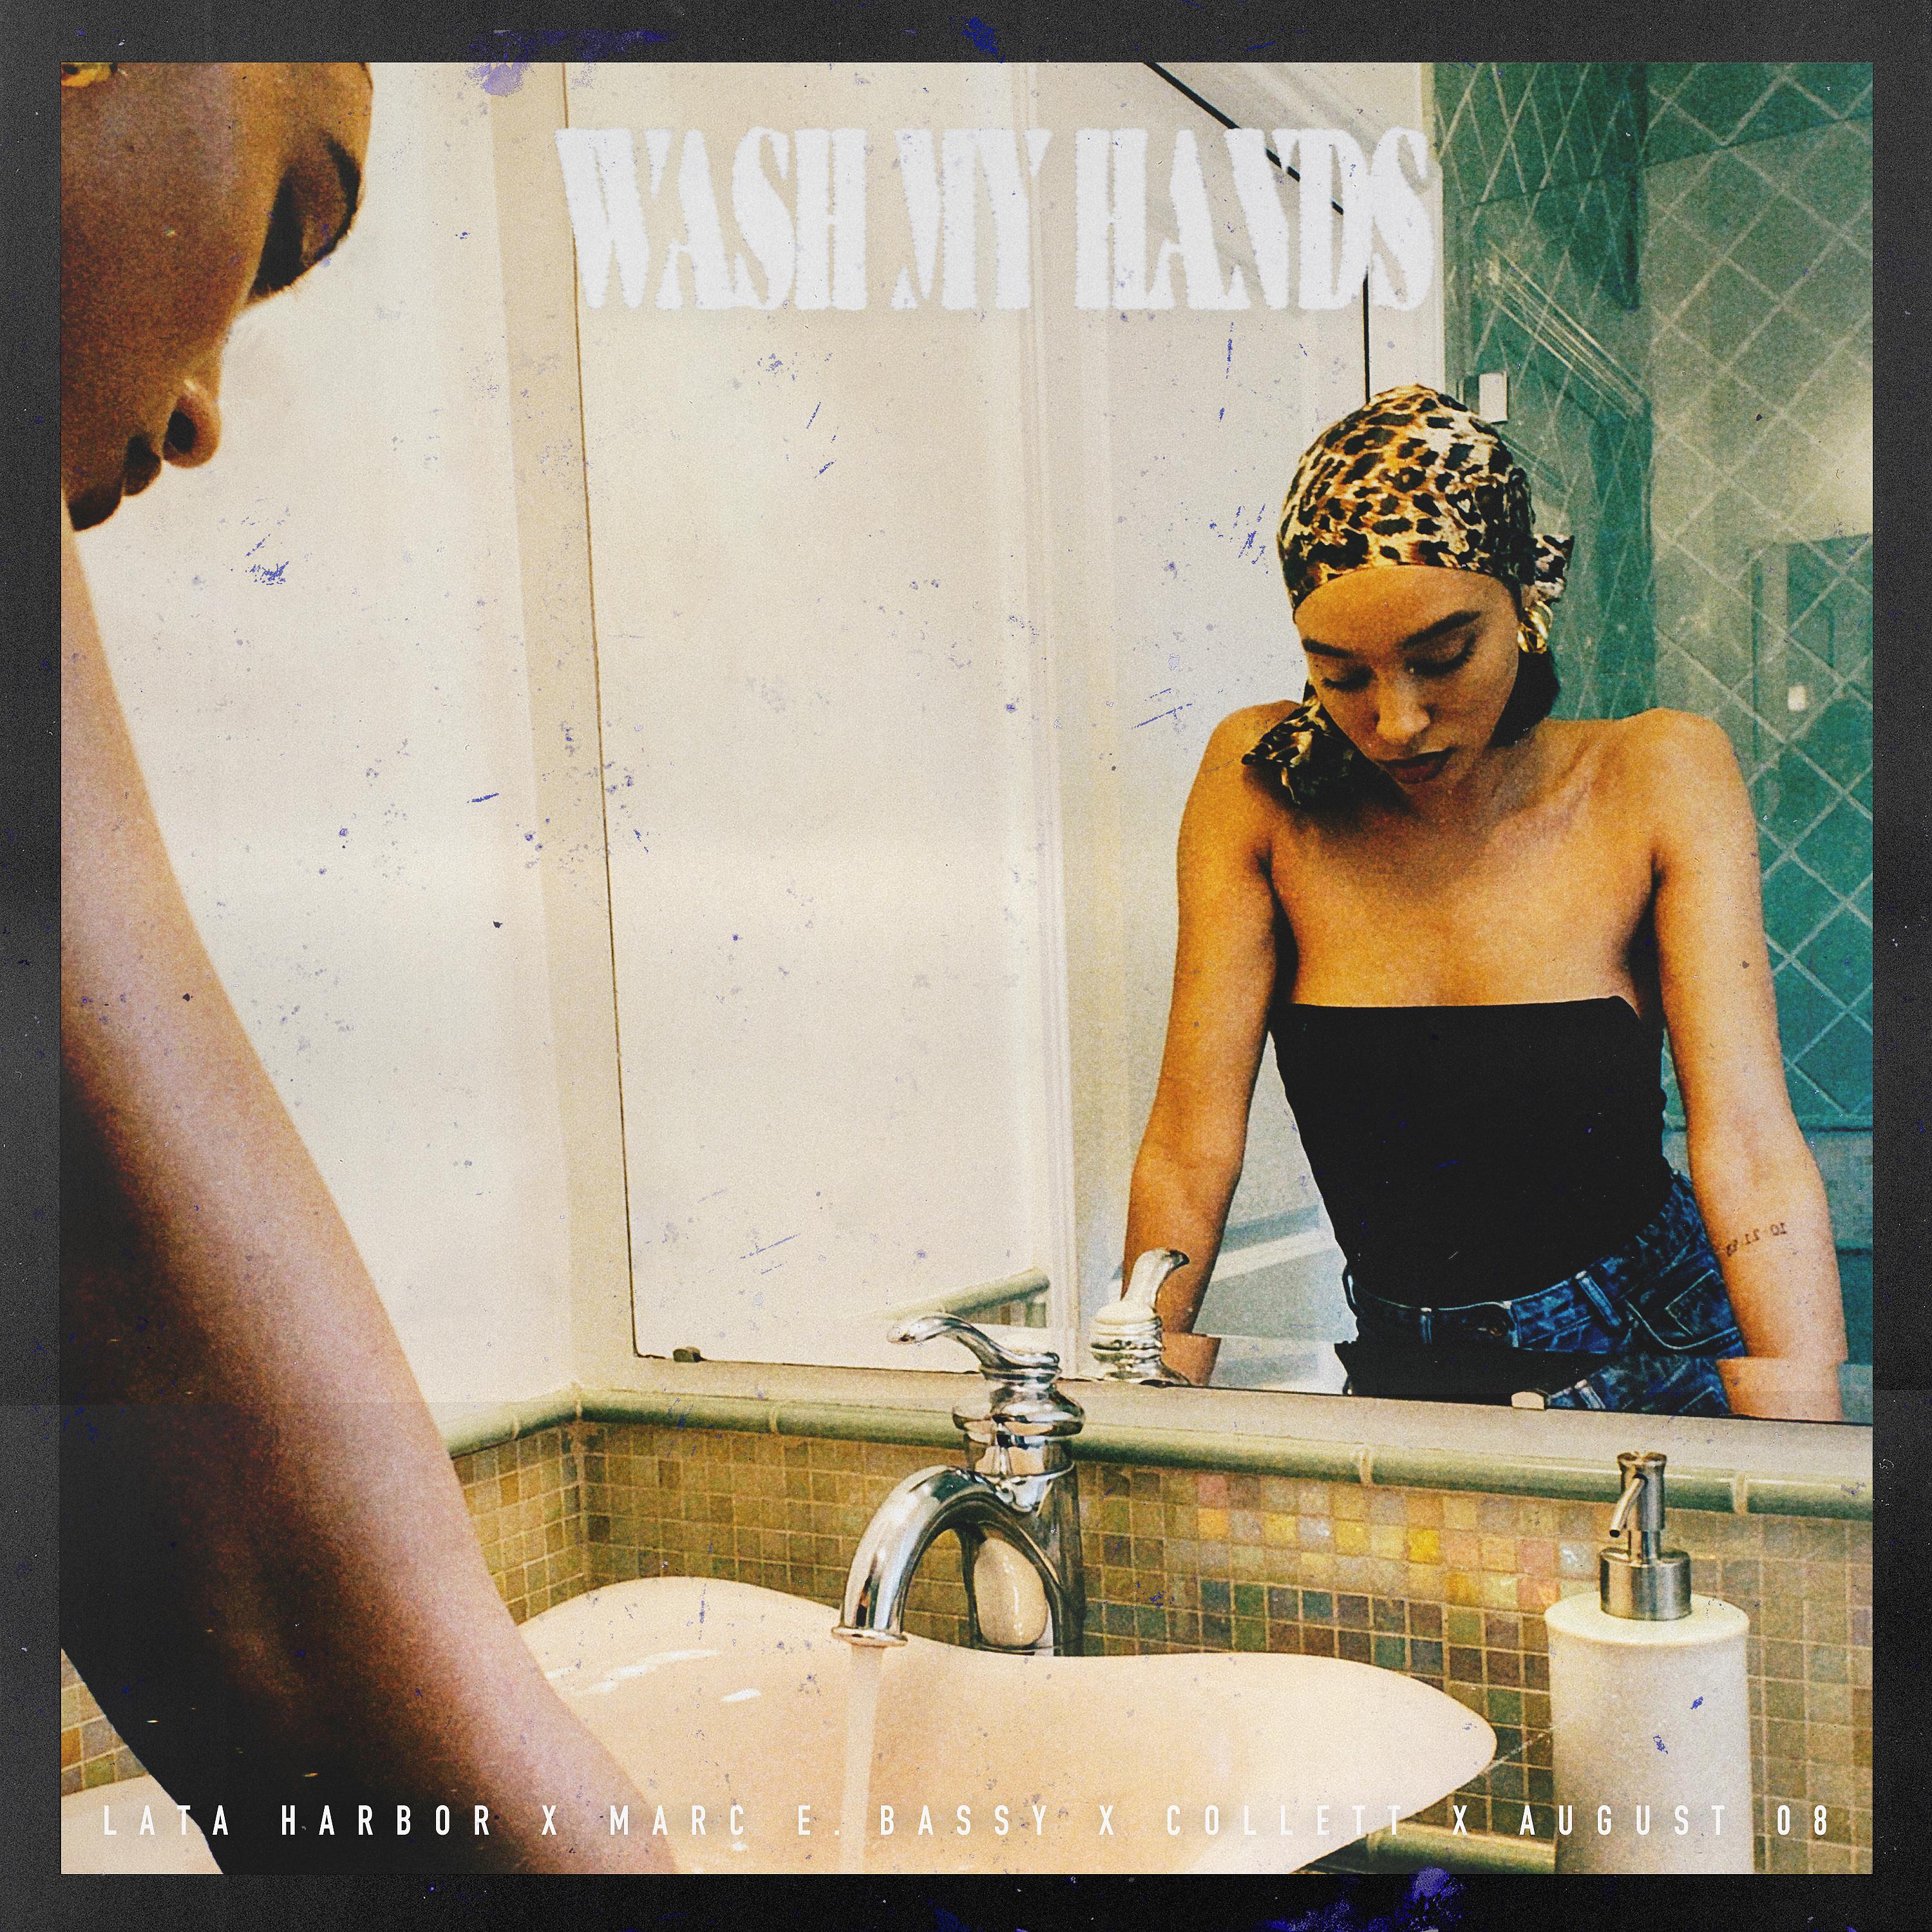 Постер альбома Wash My Hands (feat. Marc E. Bassy, Collett & August 08)